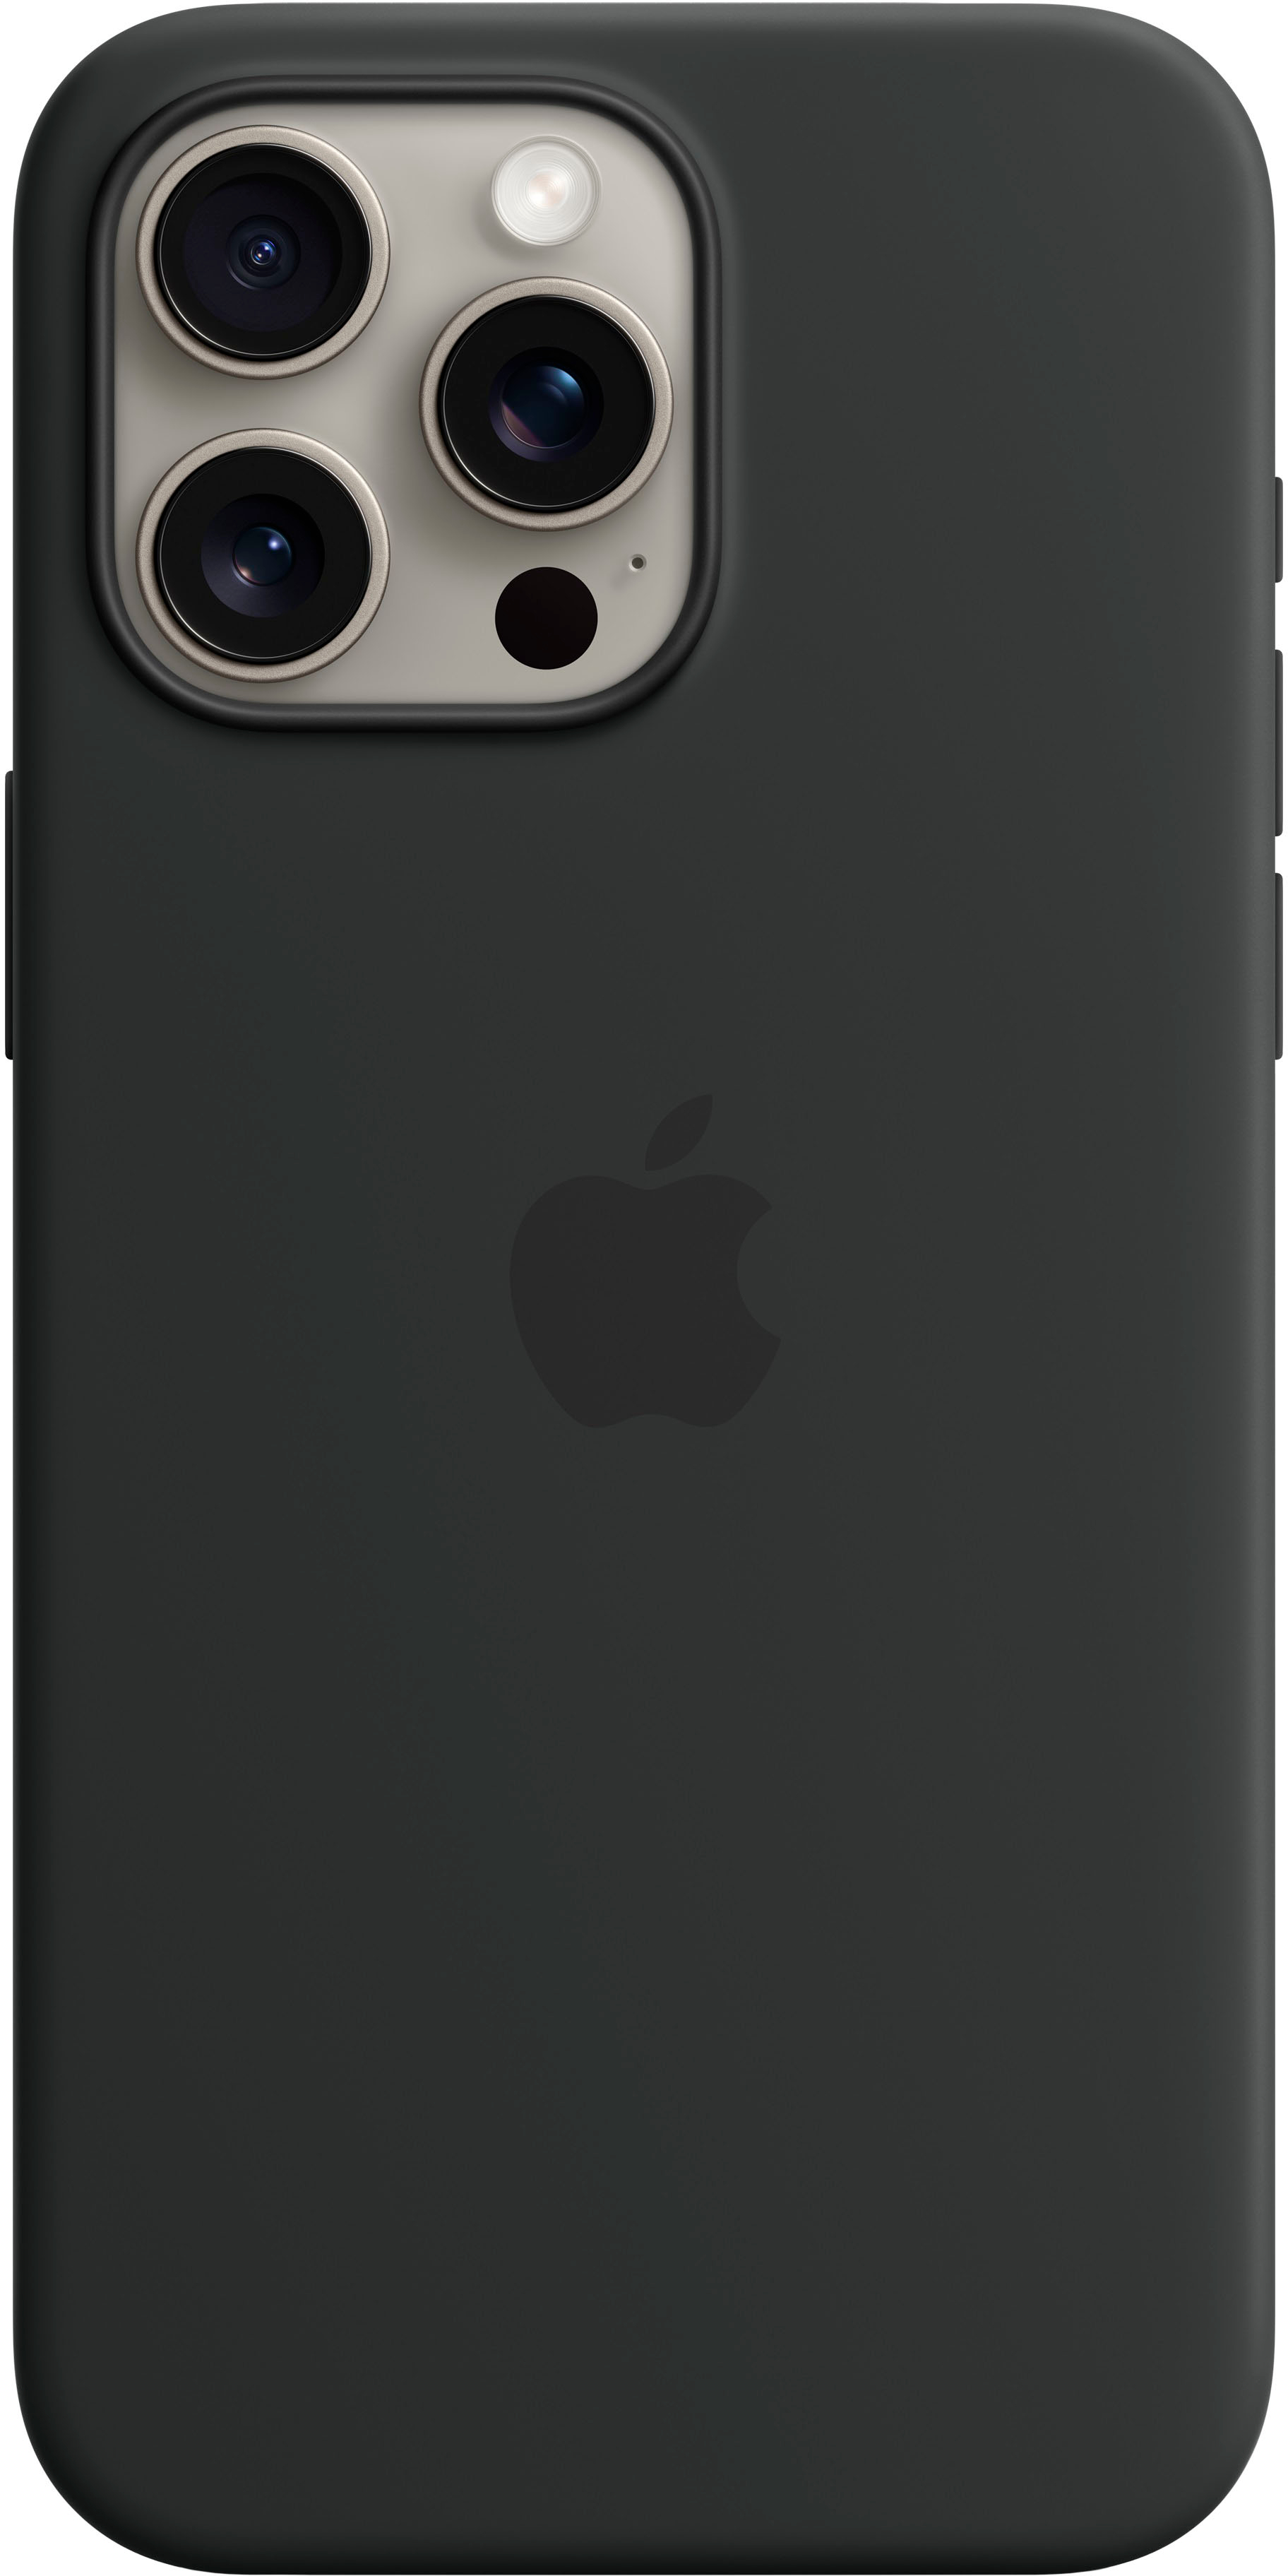 Levelo iPhone 15 Pro Max Carbon Case, Grey - Yellow